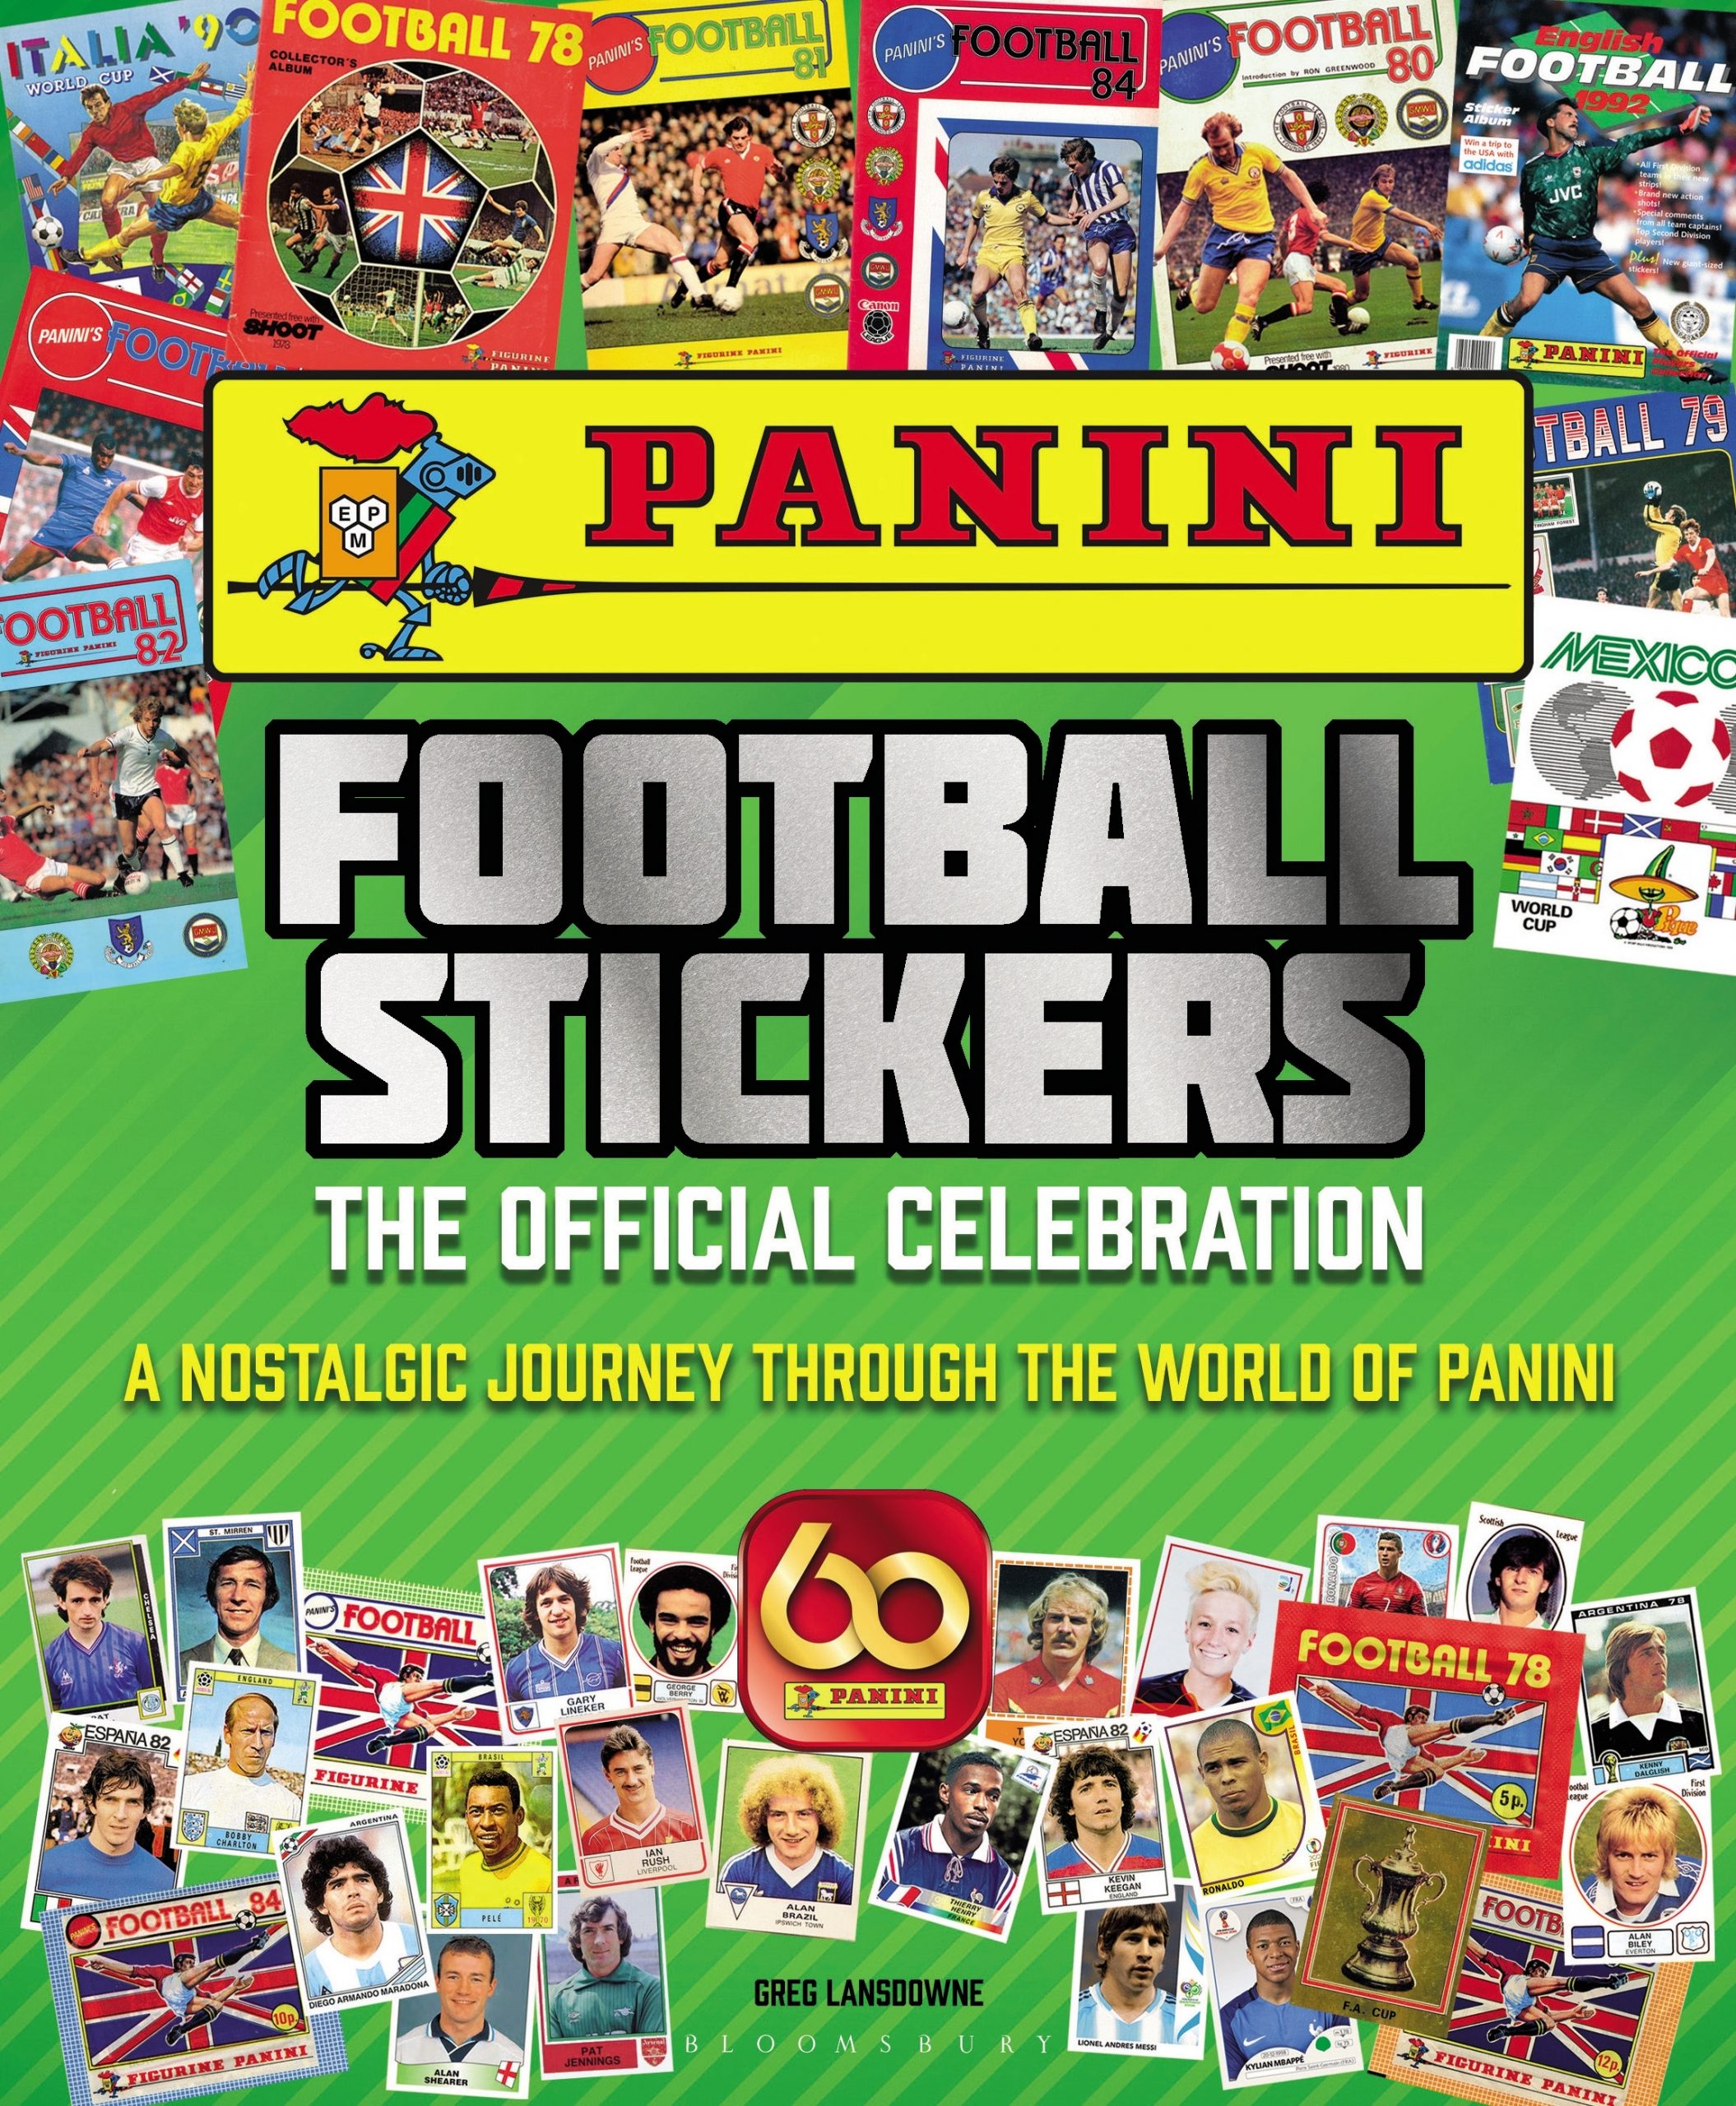 Panini Official Celebration Book Review & Interview with author Greg